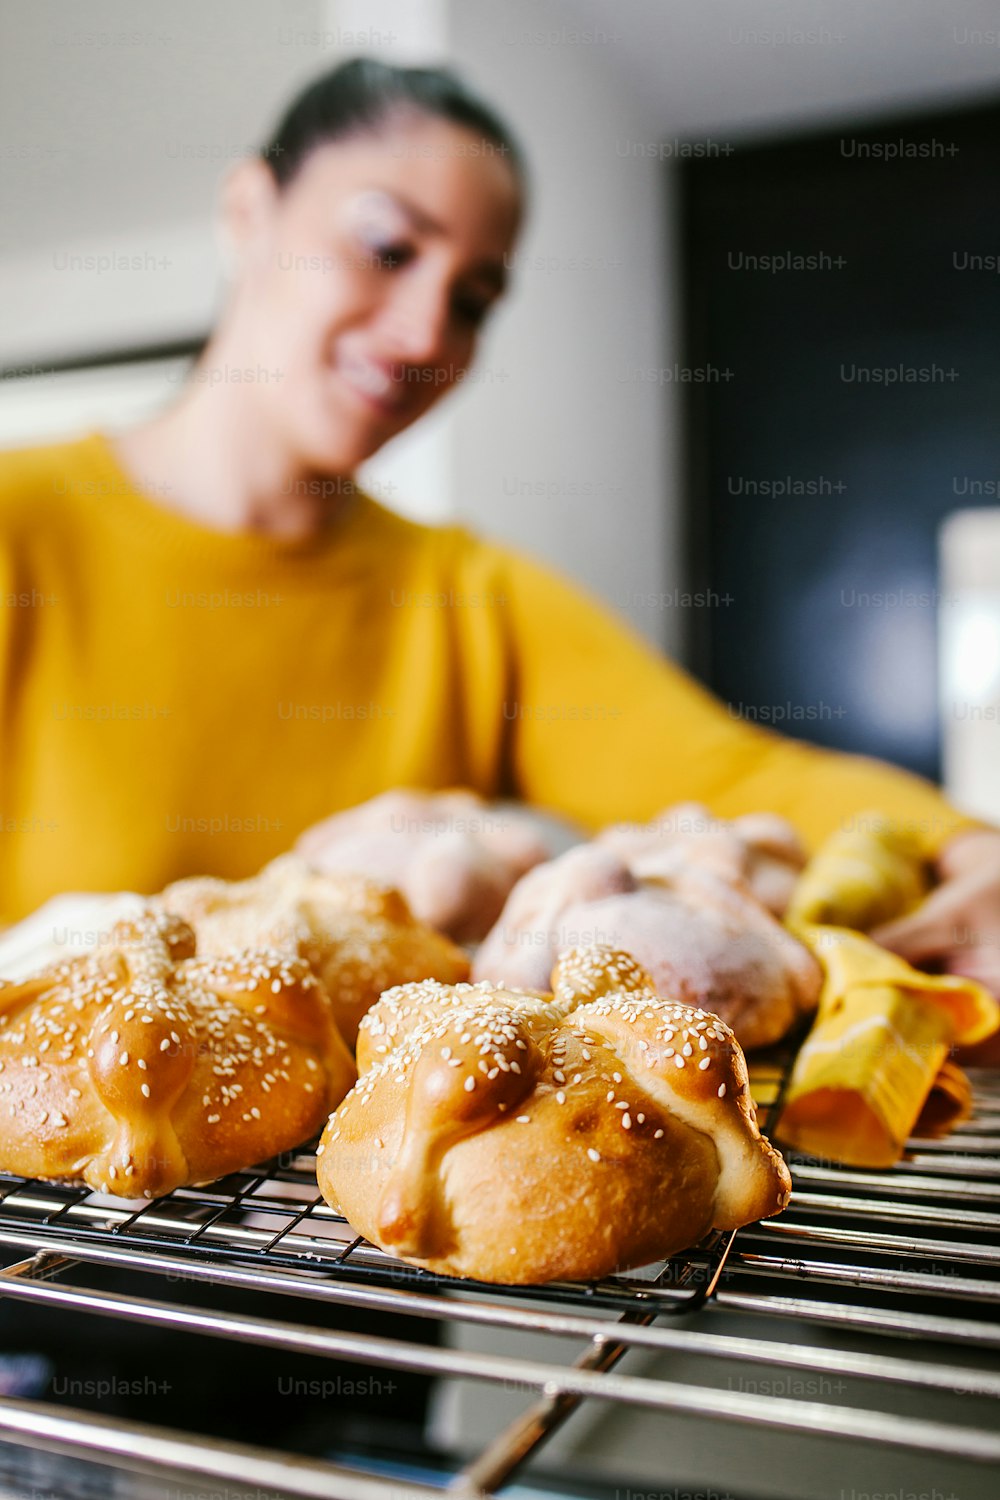 Mexican woman baking bread called pan de muerto traditional from Mexico in Halloween